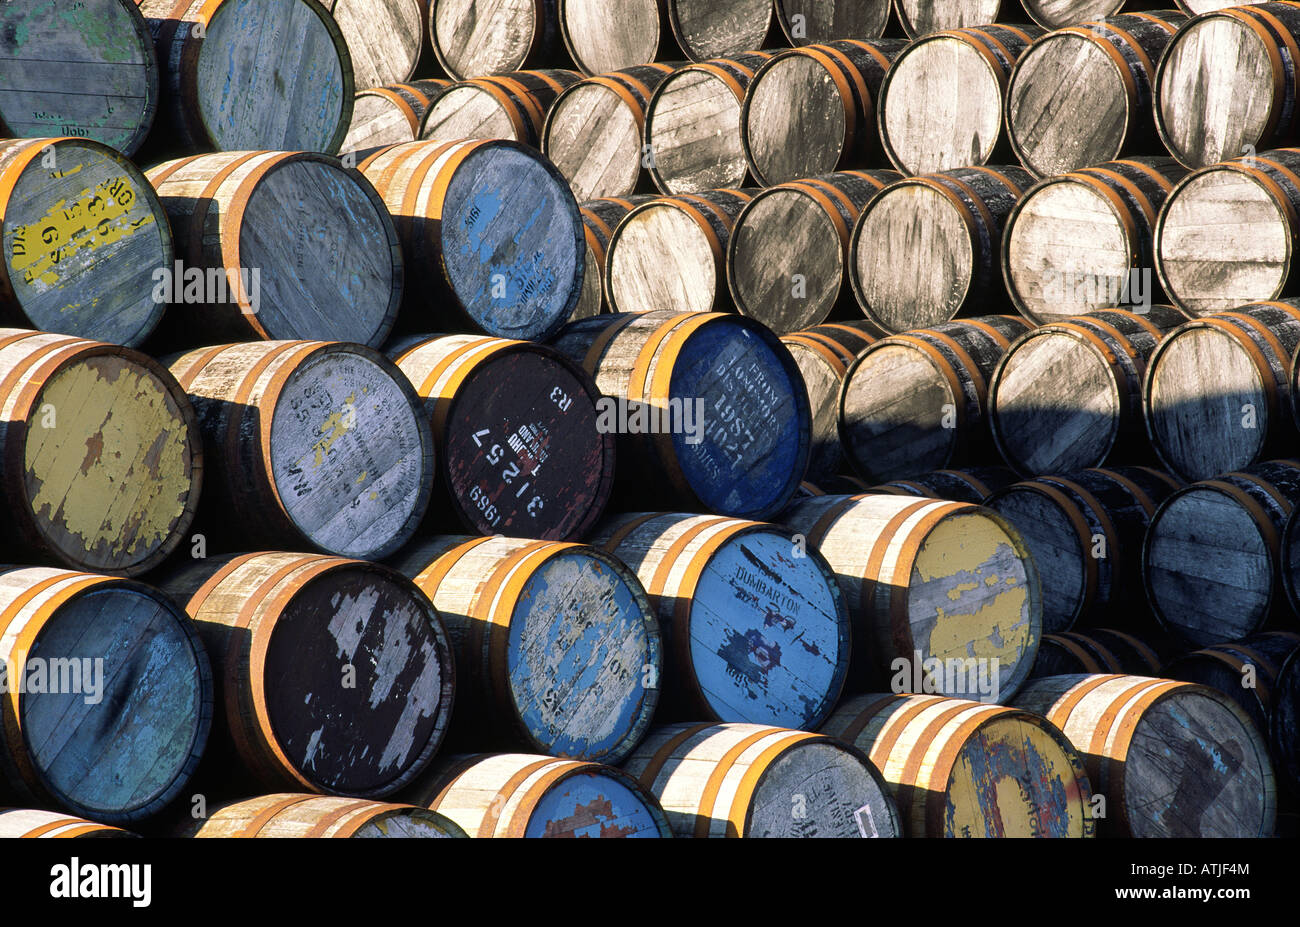 Stored whisky barrels in town of Dufftown, Scotlands whisky capital. Strathspey, Speyside, Grampian region of Scotland Stock Photo